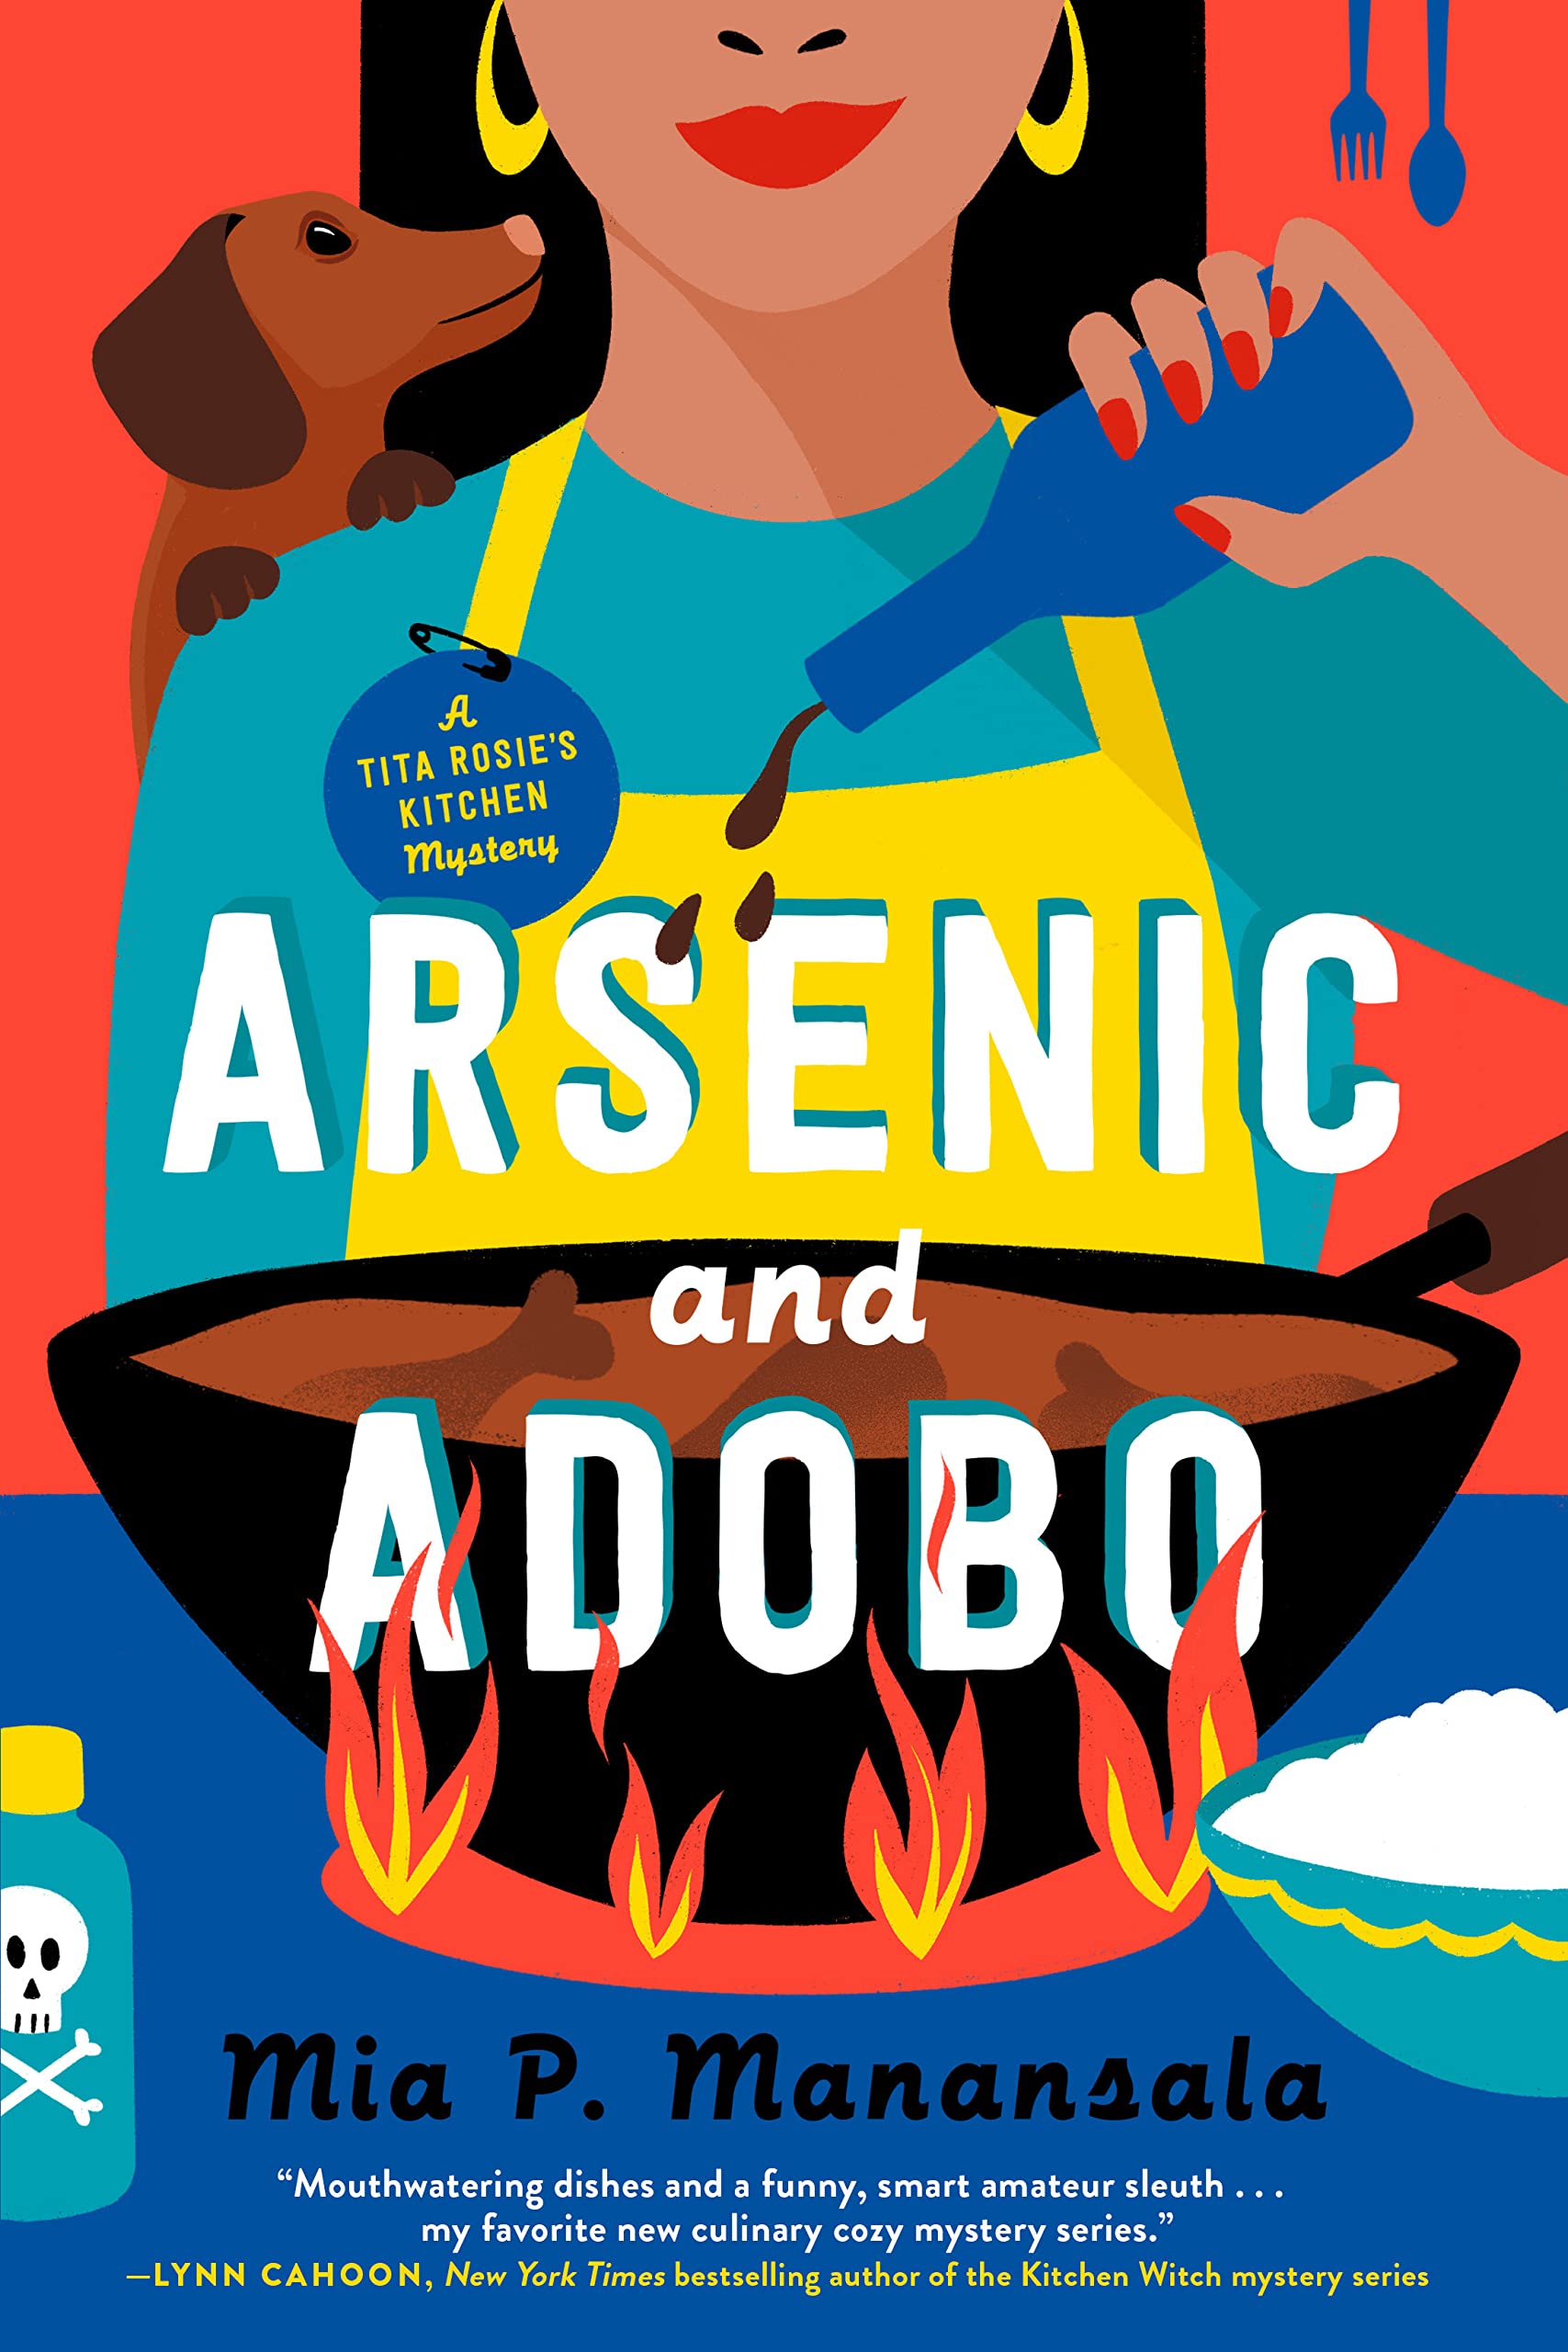 Book review: Arsenic and Adobo